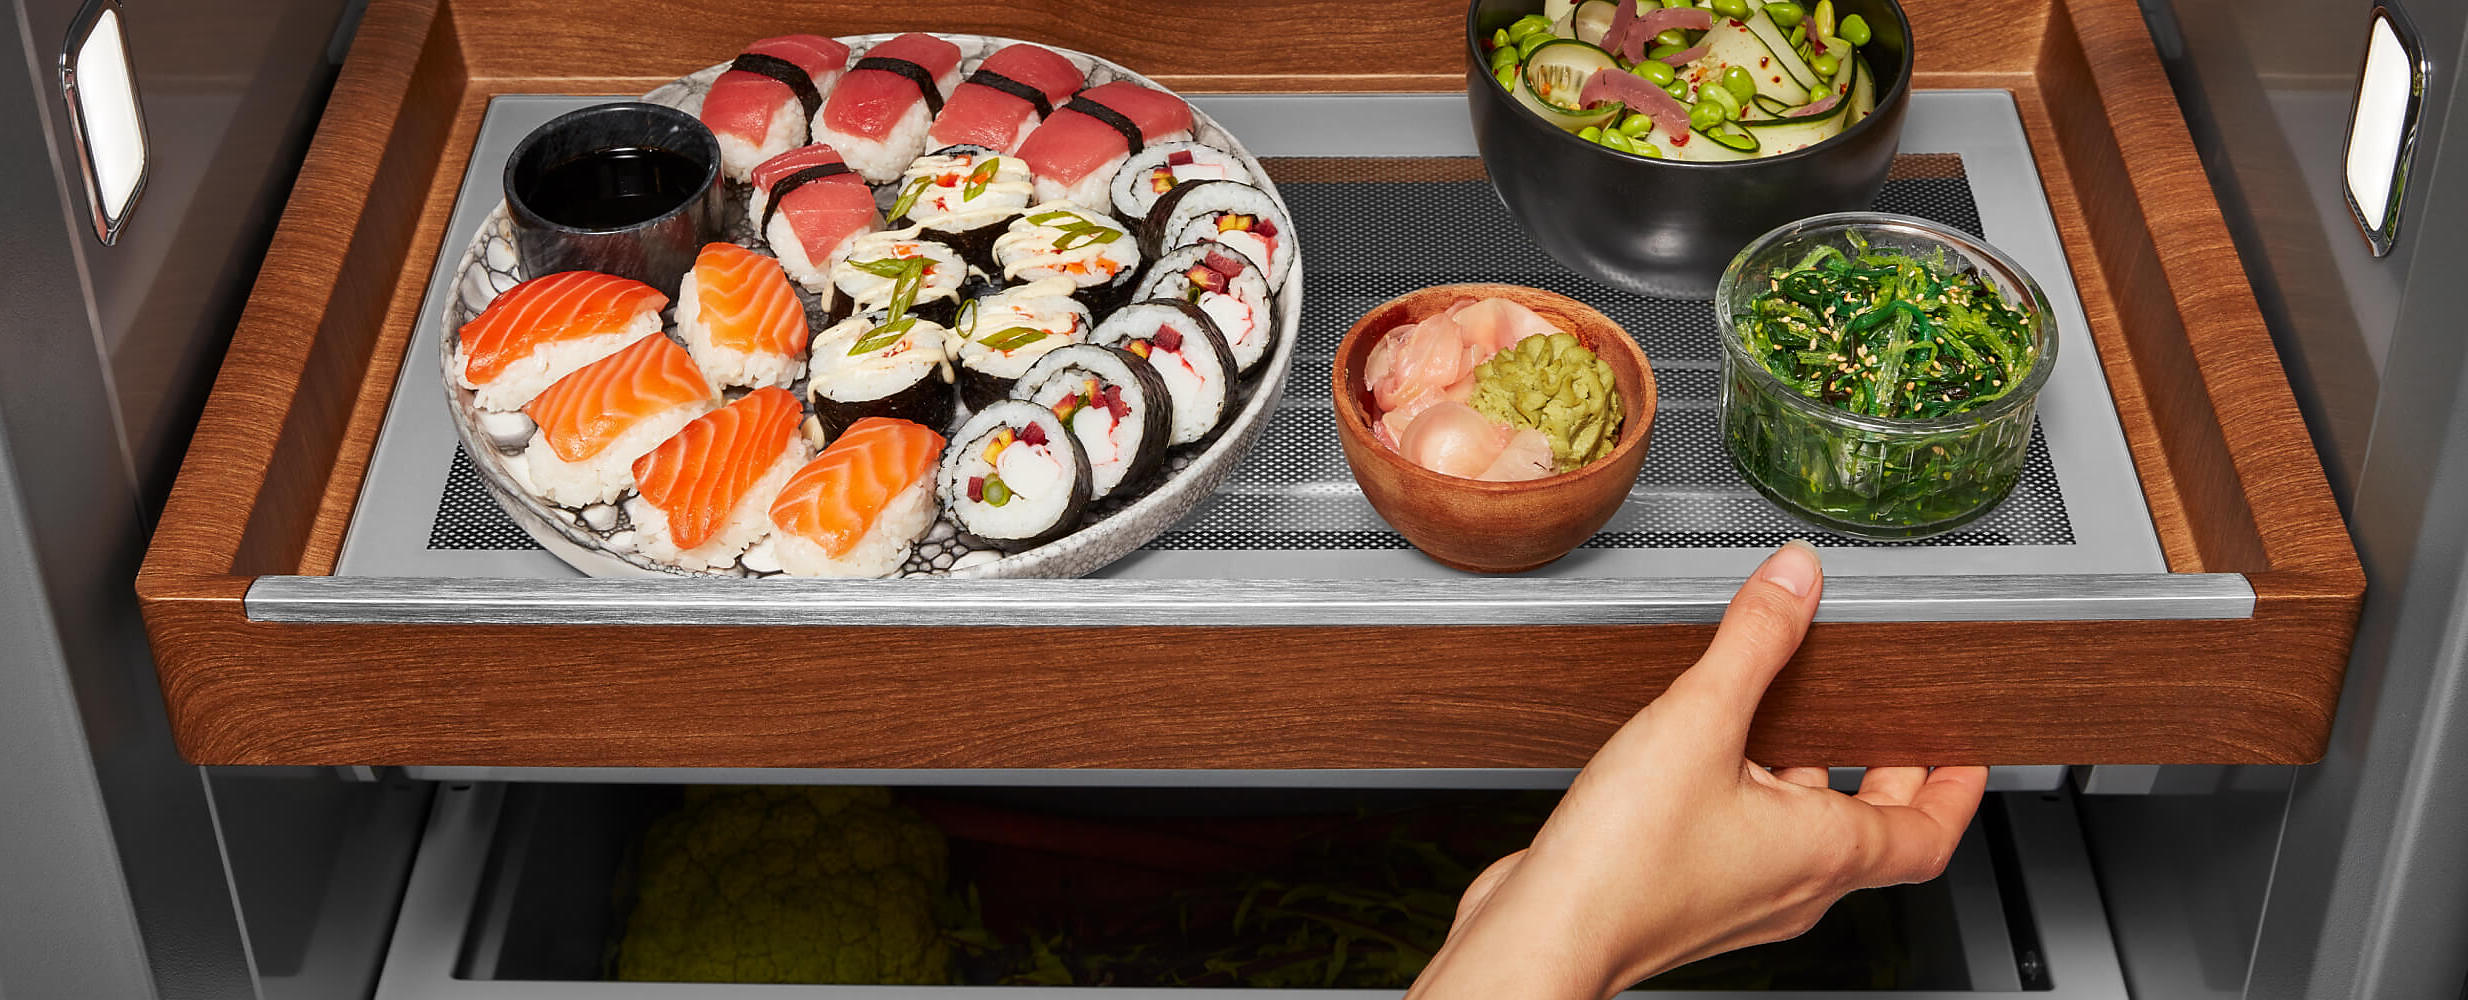 Sliding Storage Tray in a 36" KitchenAid® Built-In Side-by-Side Refrigerator holding sushi and other foods